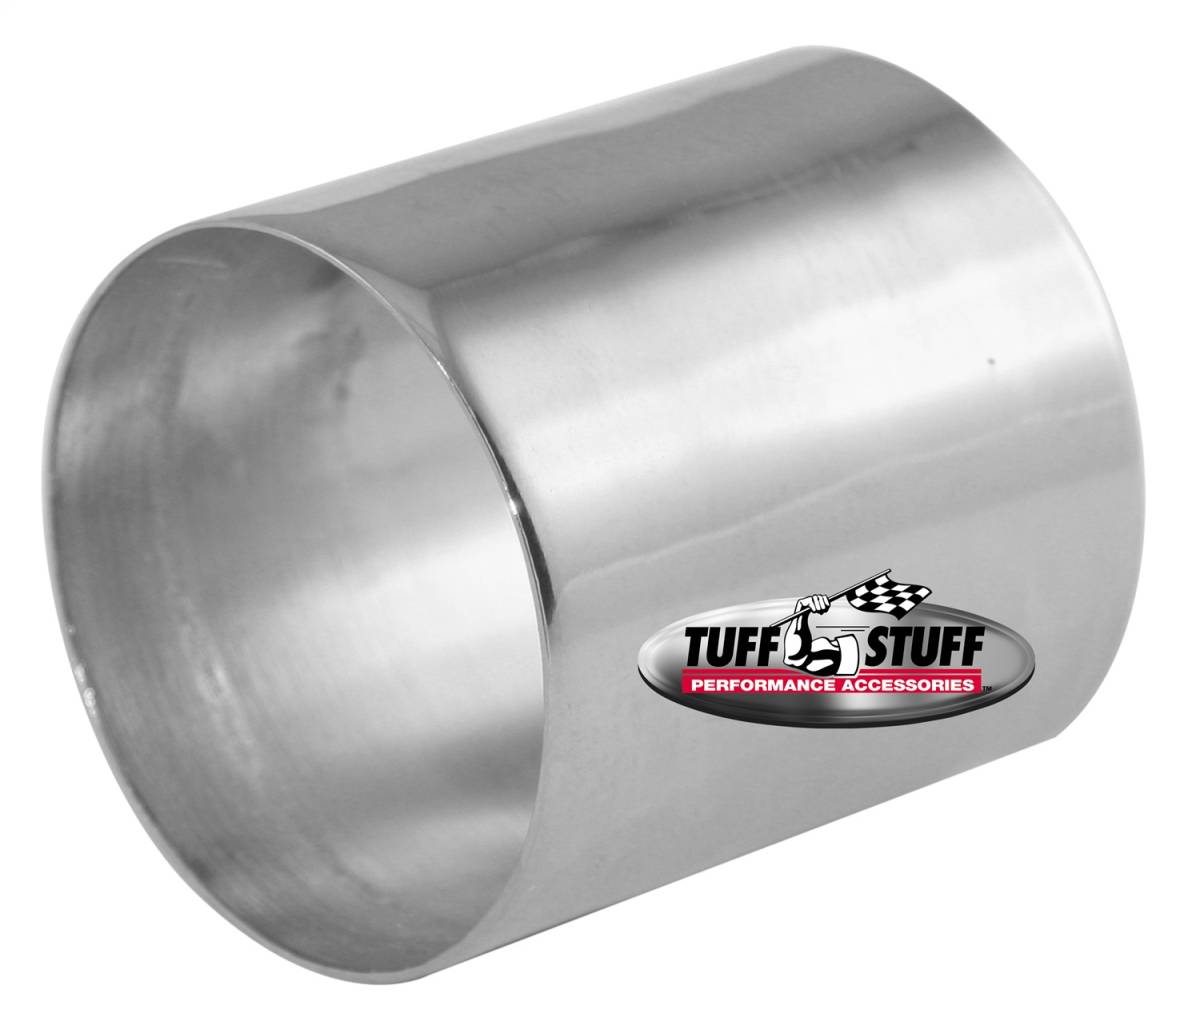 Tuff Stuff Performance - Starter Solenoid Cover Fits Most Full Size Chevy/Buick/Cadillac/Olds/Pontiac/OEM/Tuff Stuff Starters PN[3510/3570/3631/3689] Chrome 7624